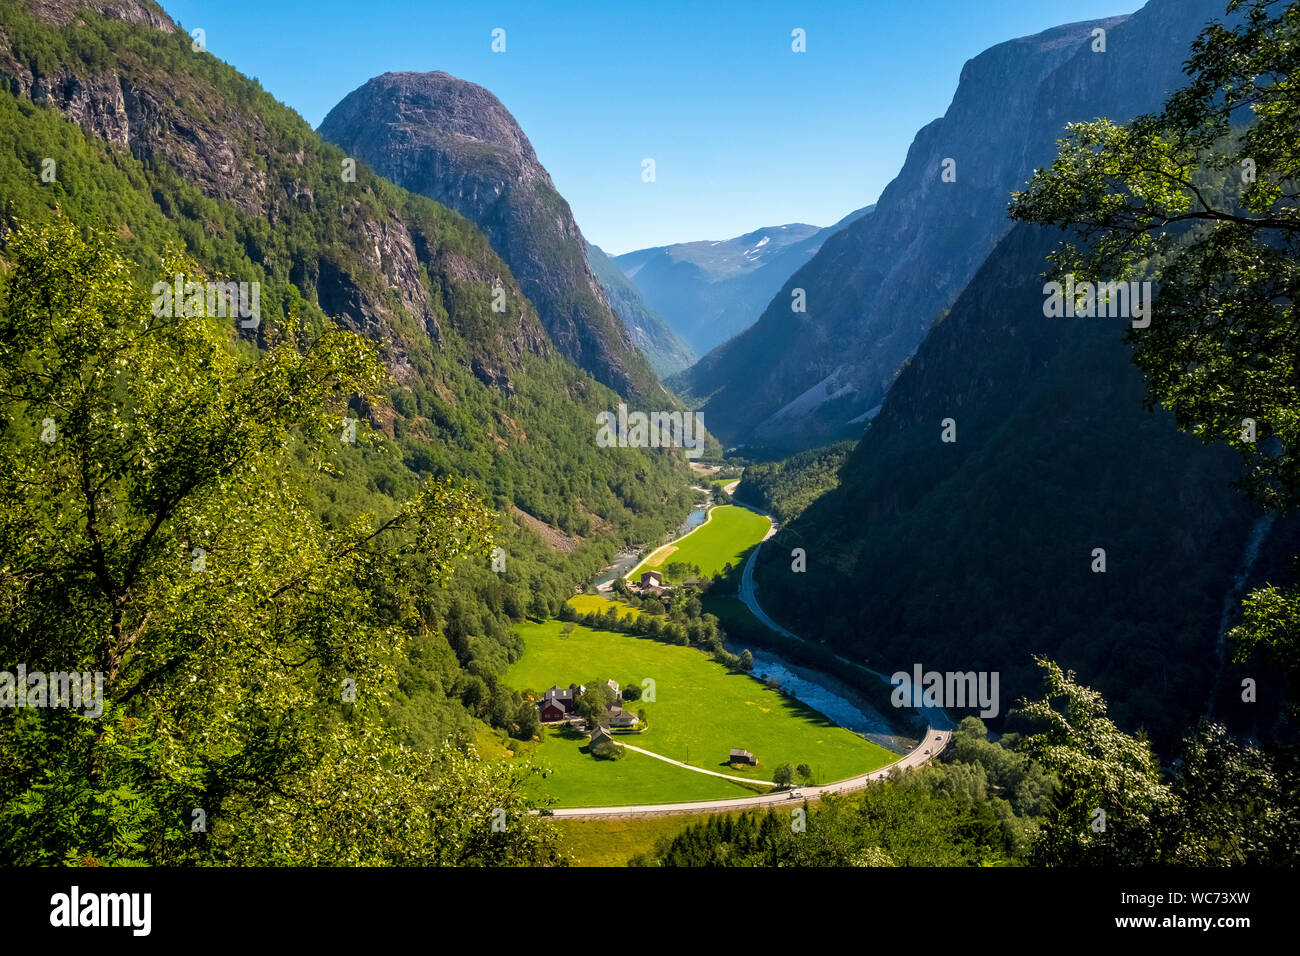 valley, green meadows, path, rock faces, blue sky, Stalheim, Hordaland, Norway, Scandinavia, Europe, NOR, travel, tourism, destination, sightseeing, s Stock Photo